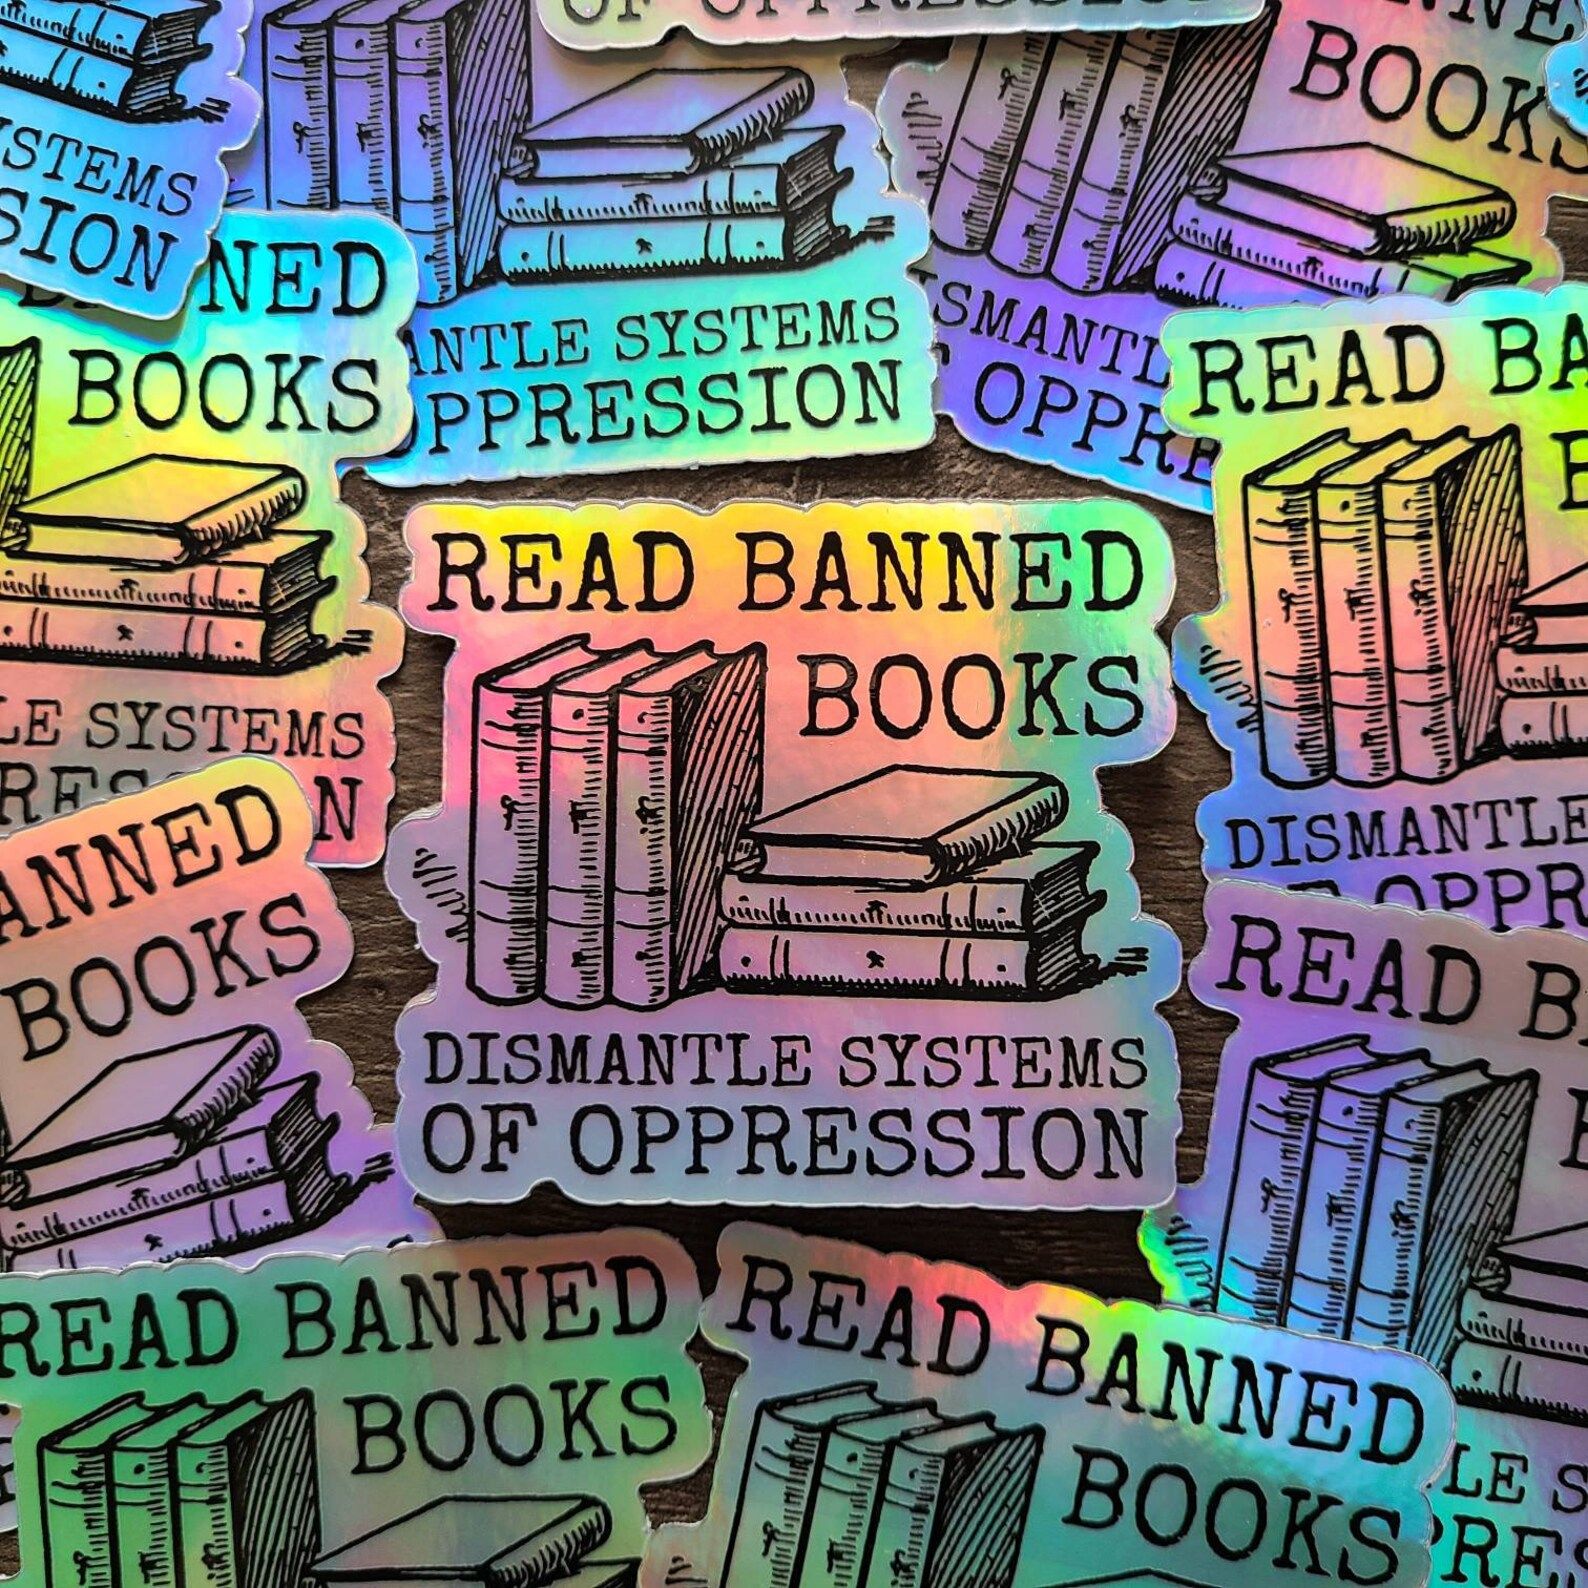 holographic stickers that read "read banned books, dismantle systems of oppression."